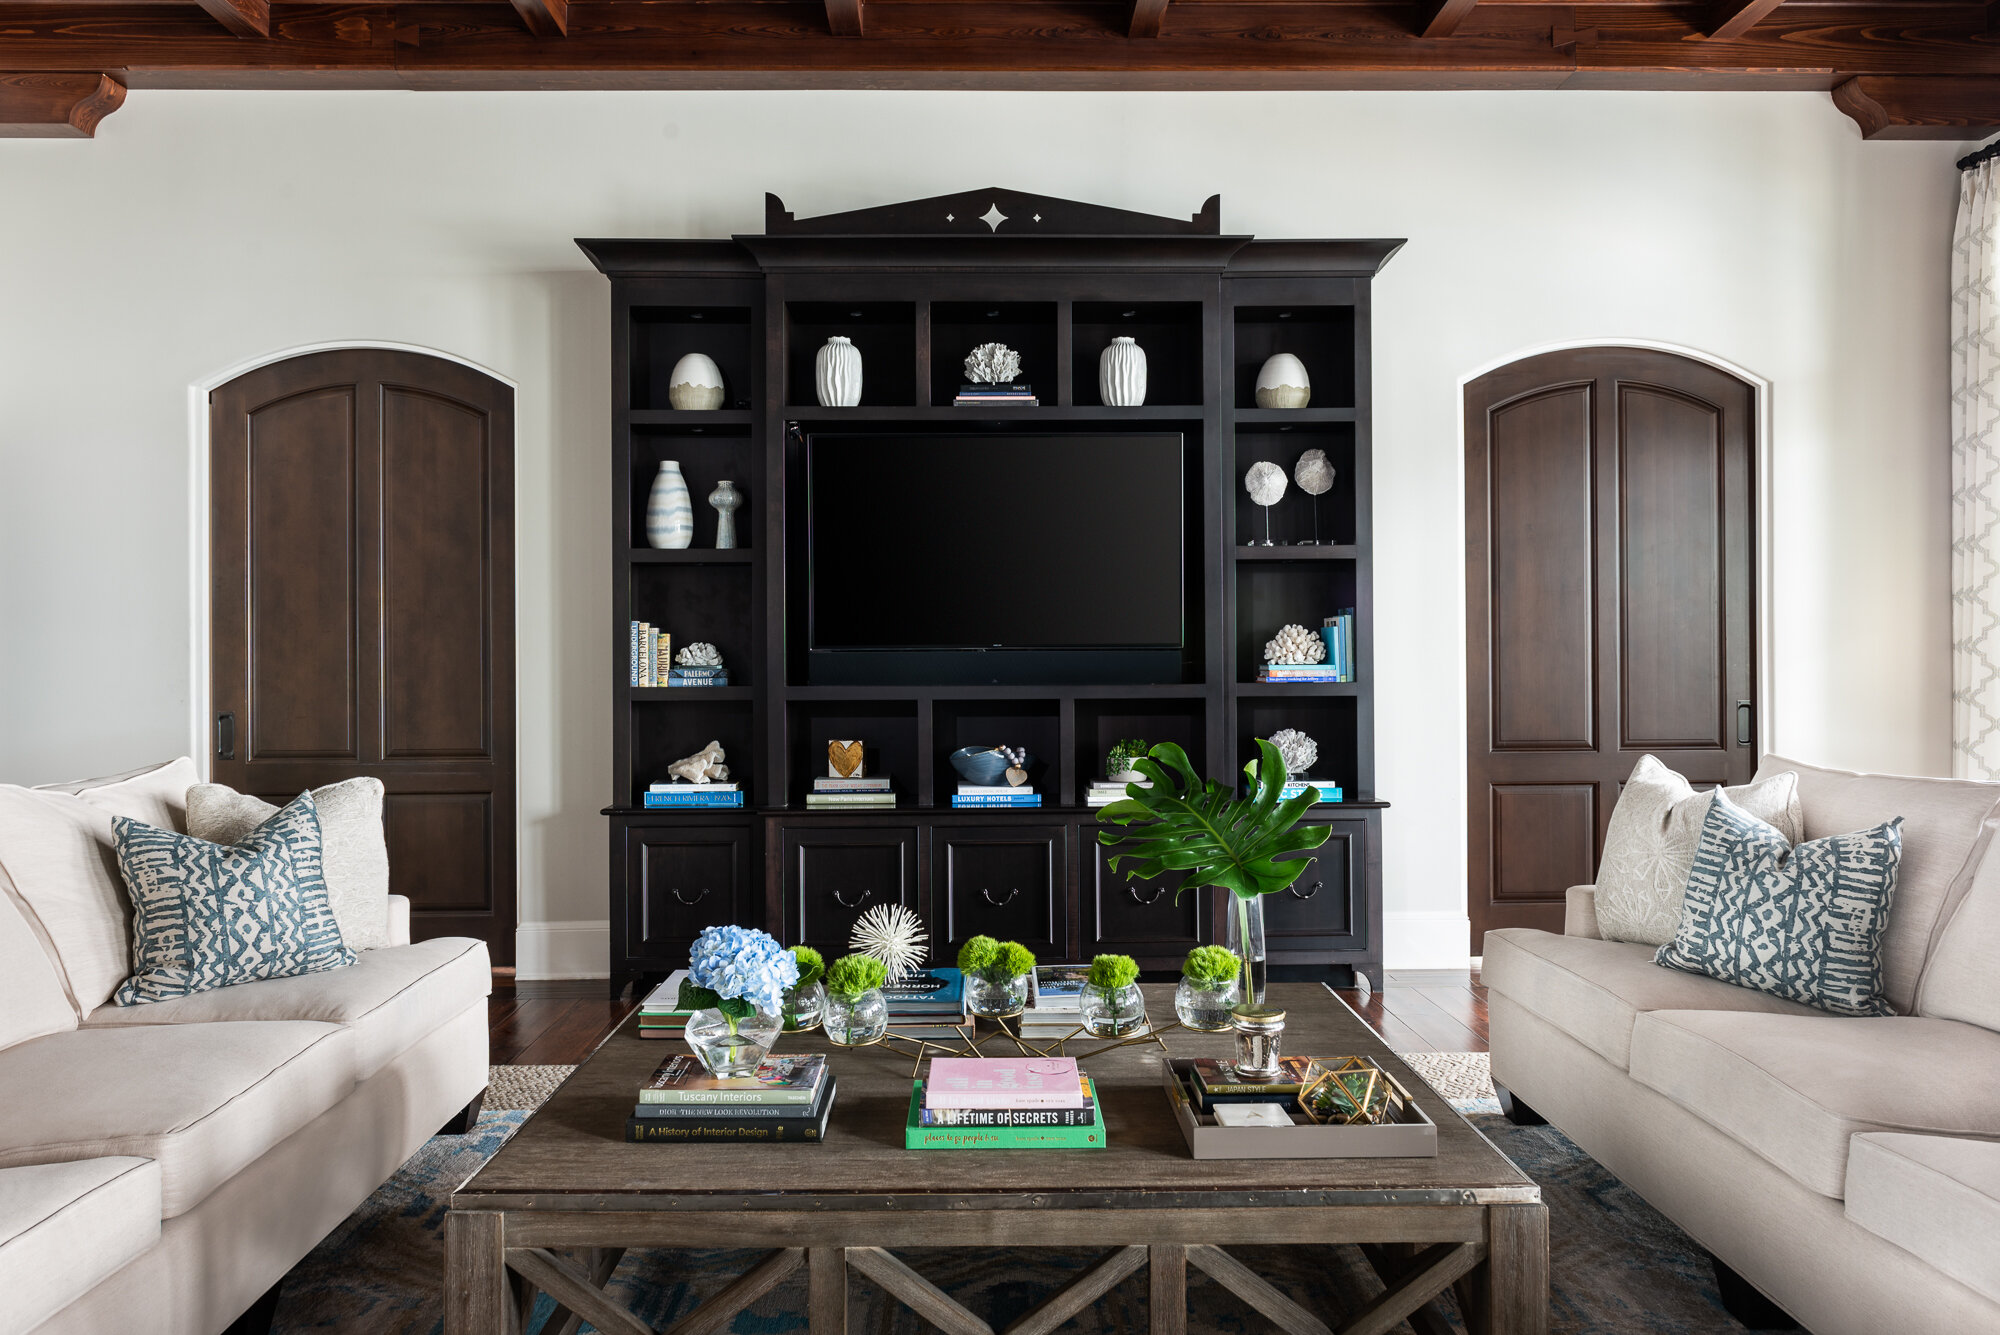 Bright white living room with black wood center console with shelves